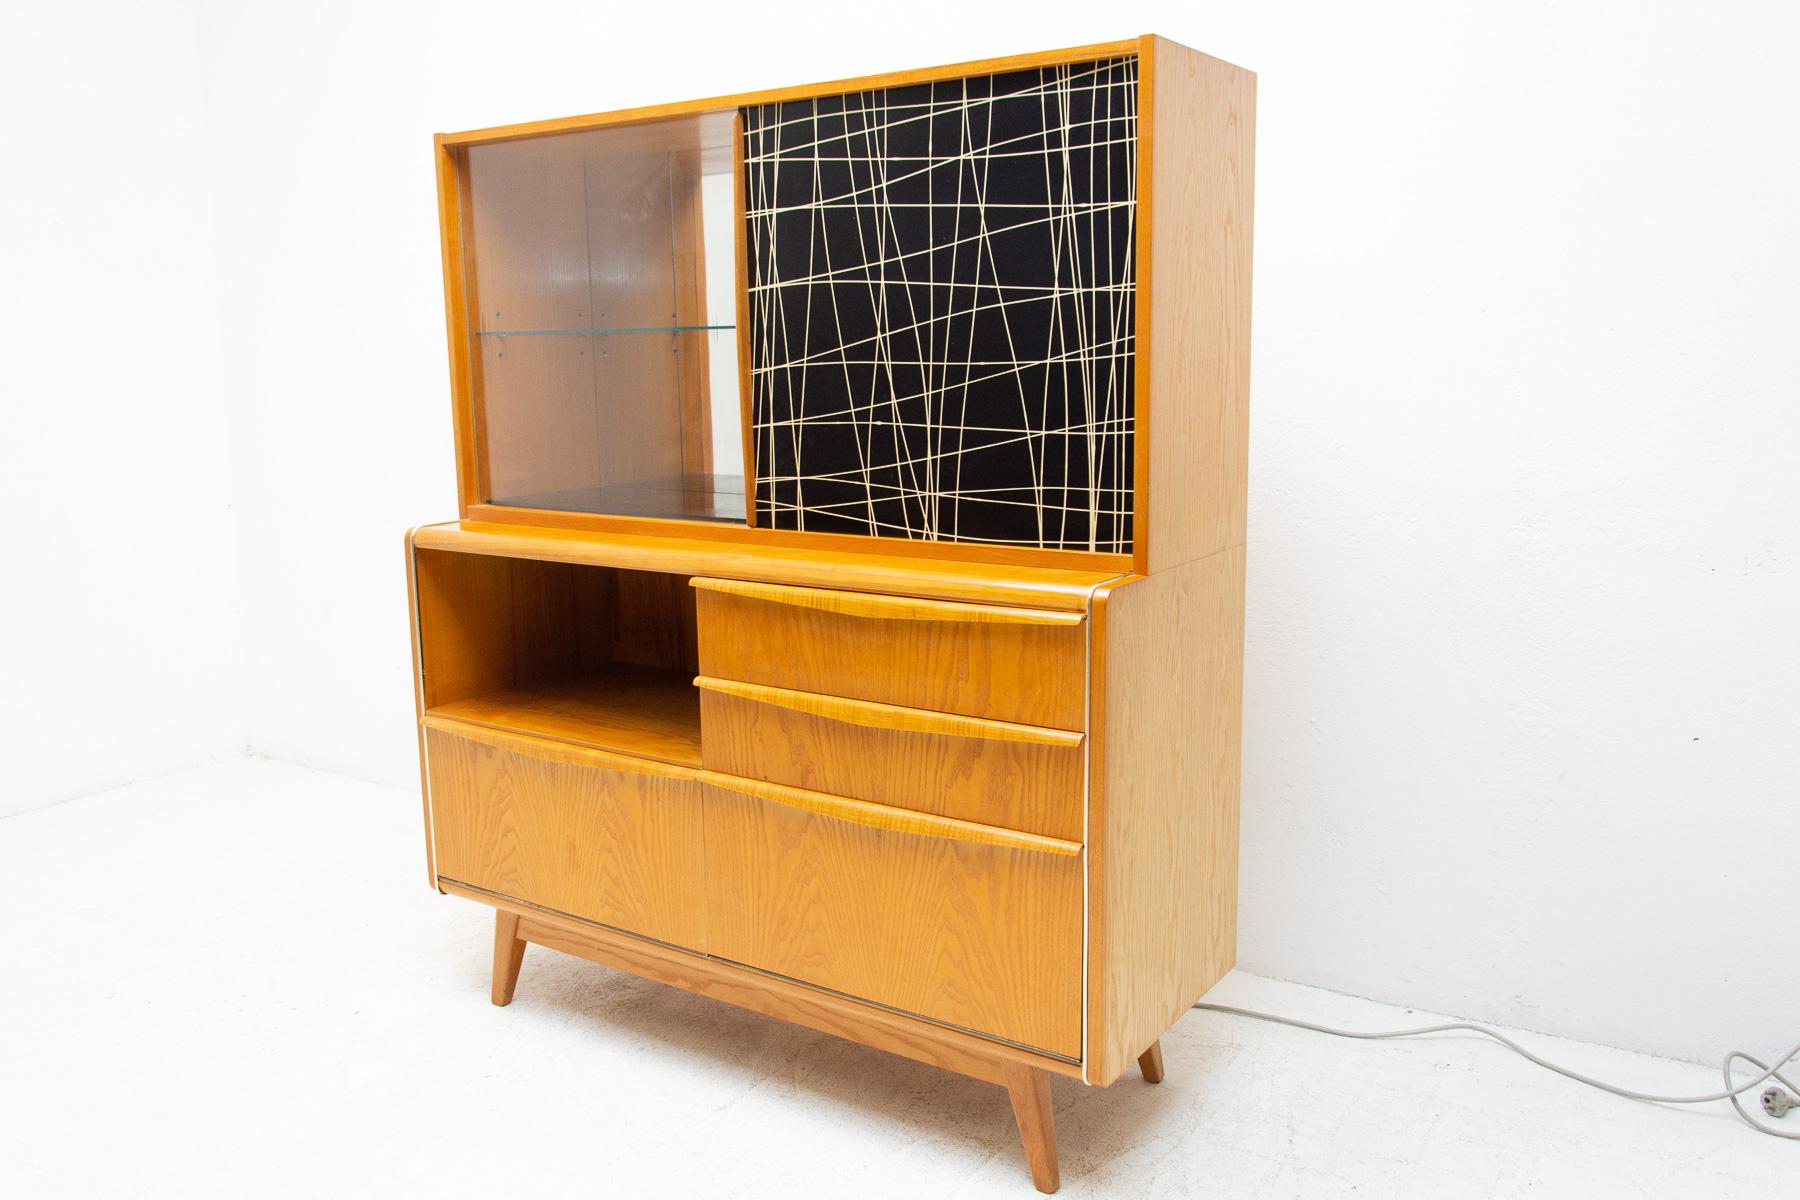 Midcentury credenza/cabinet with bar. It was designed by Hubert Nepožitek & Bohumil Landsman for Jitona company under serial No. U-300 in the 1960´s. It features a glazed upper section with glass shelf to the left and laminated doors to the right,